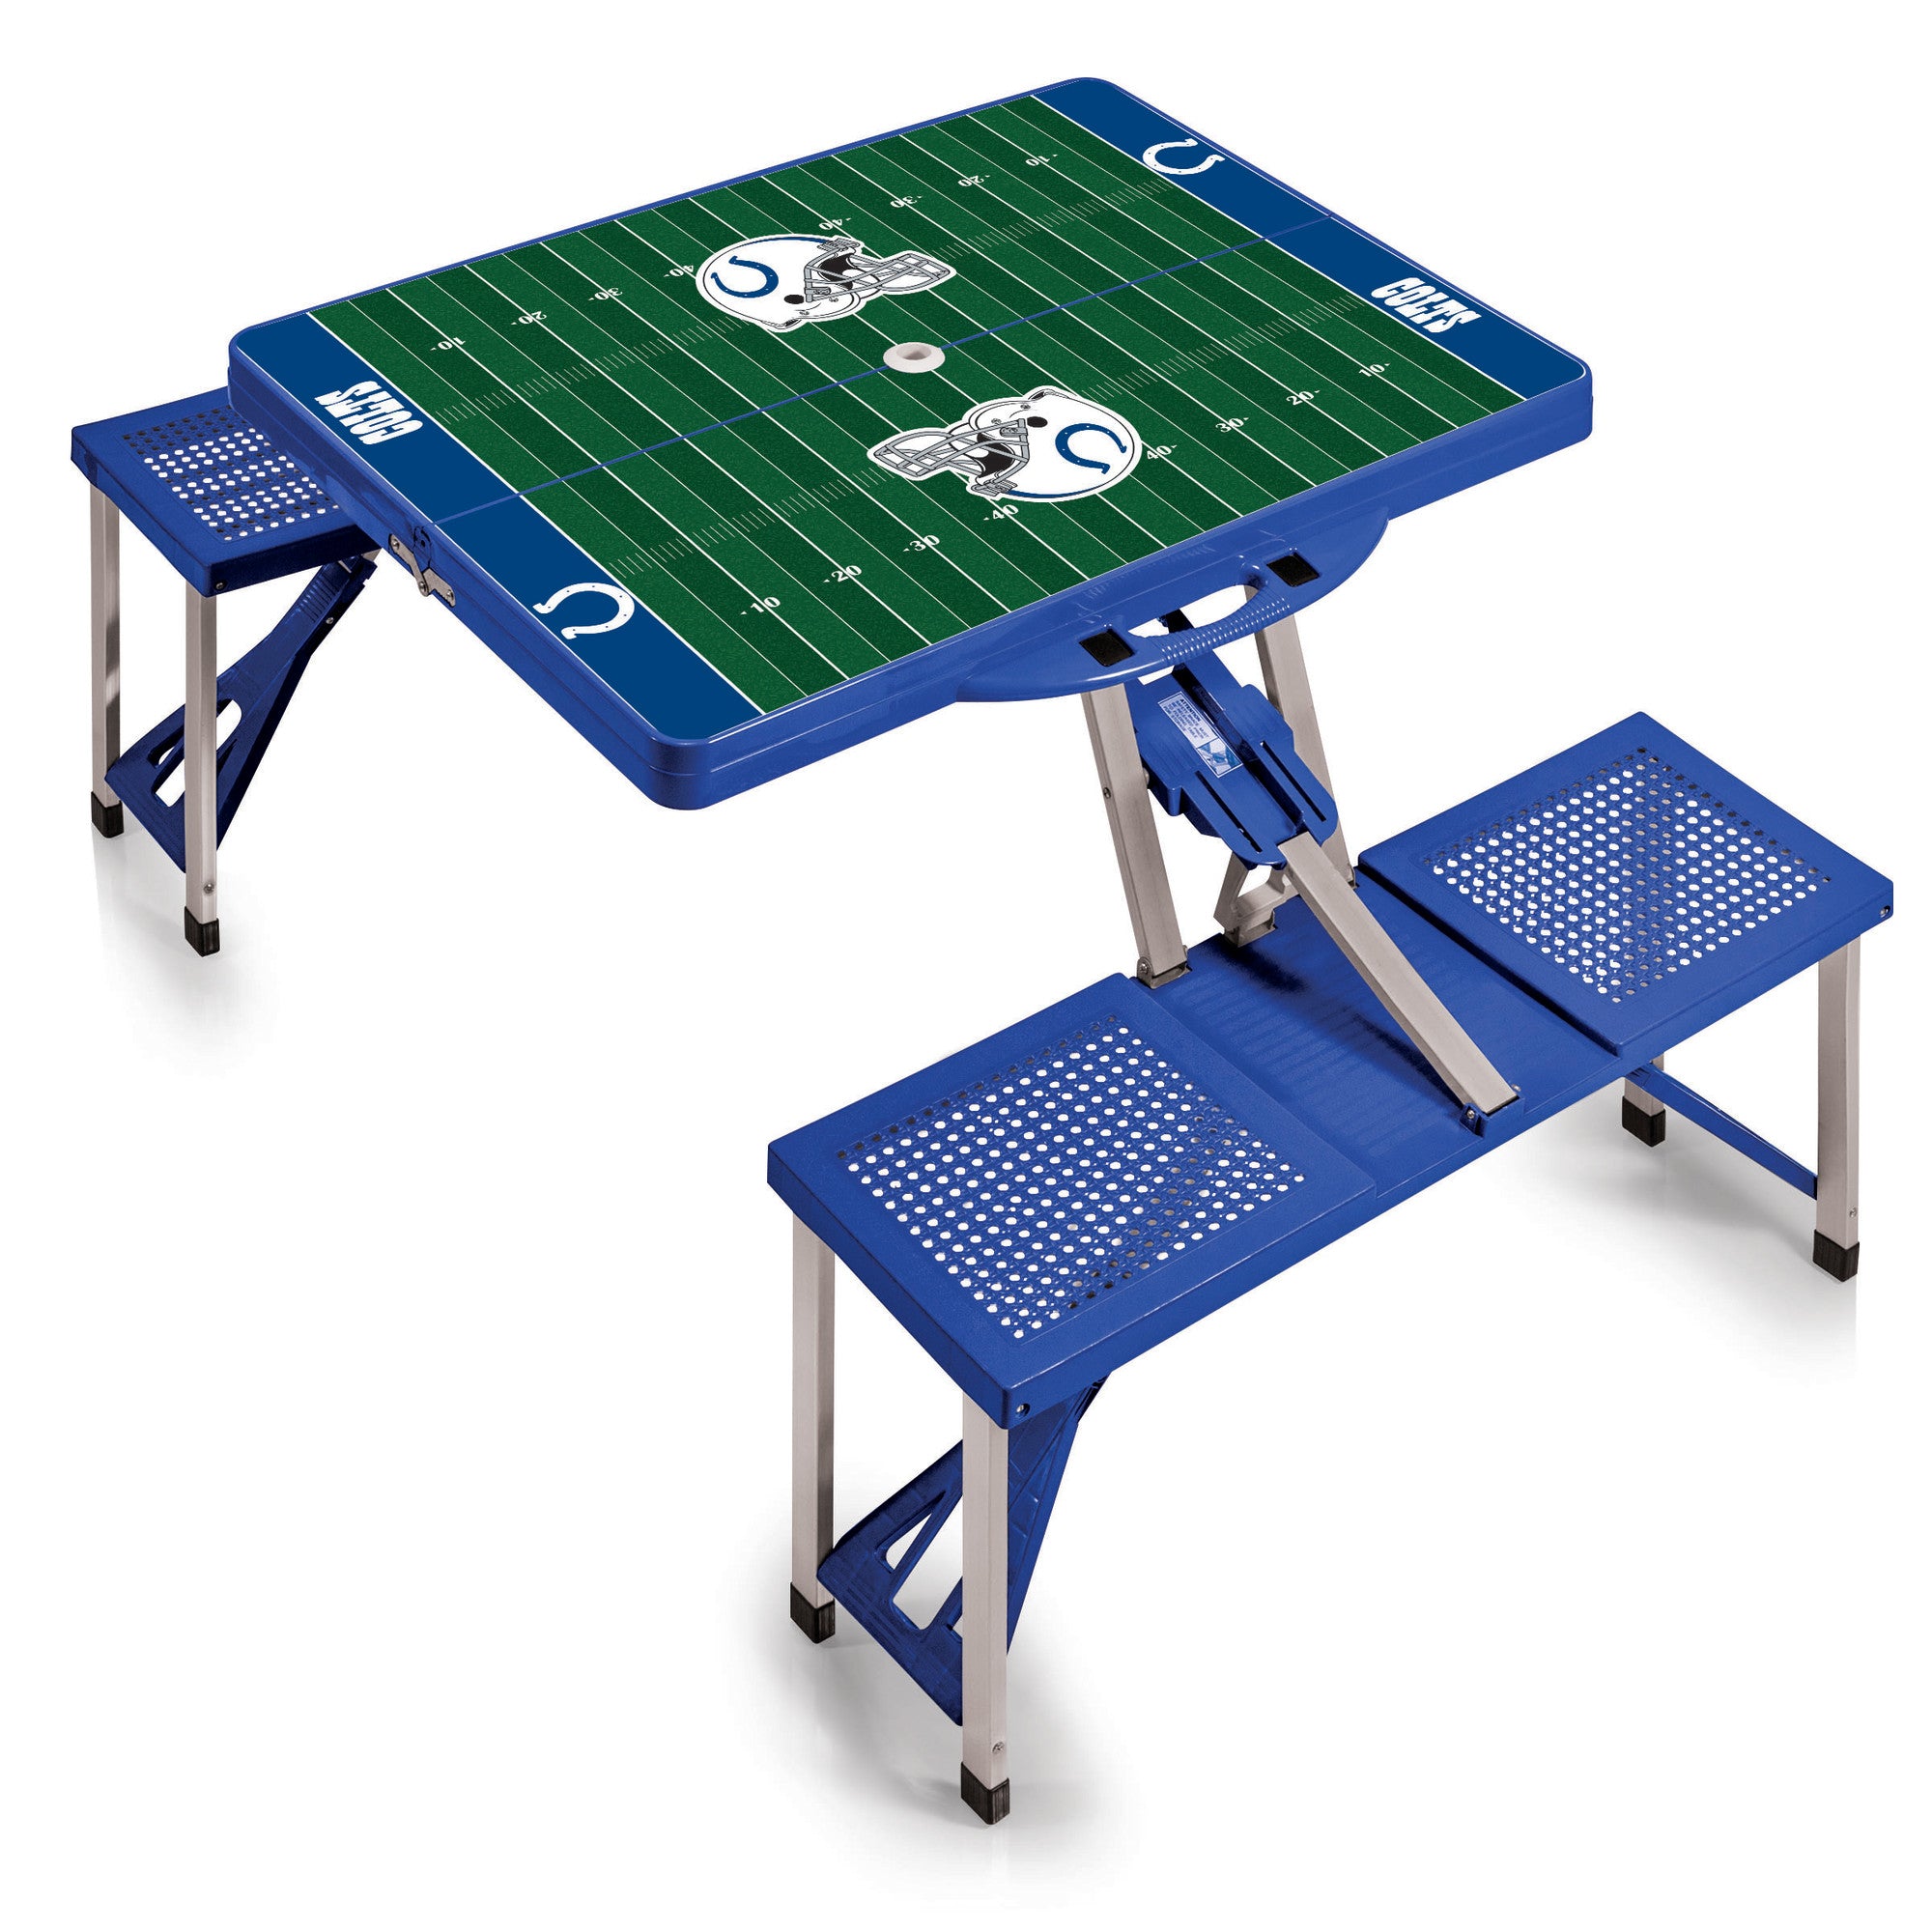 Indianapolis Colts Football Field - Picnic Table Portable Folding Table with Seats